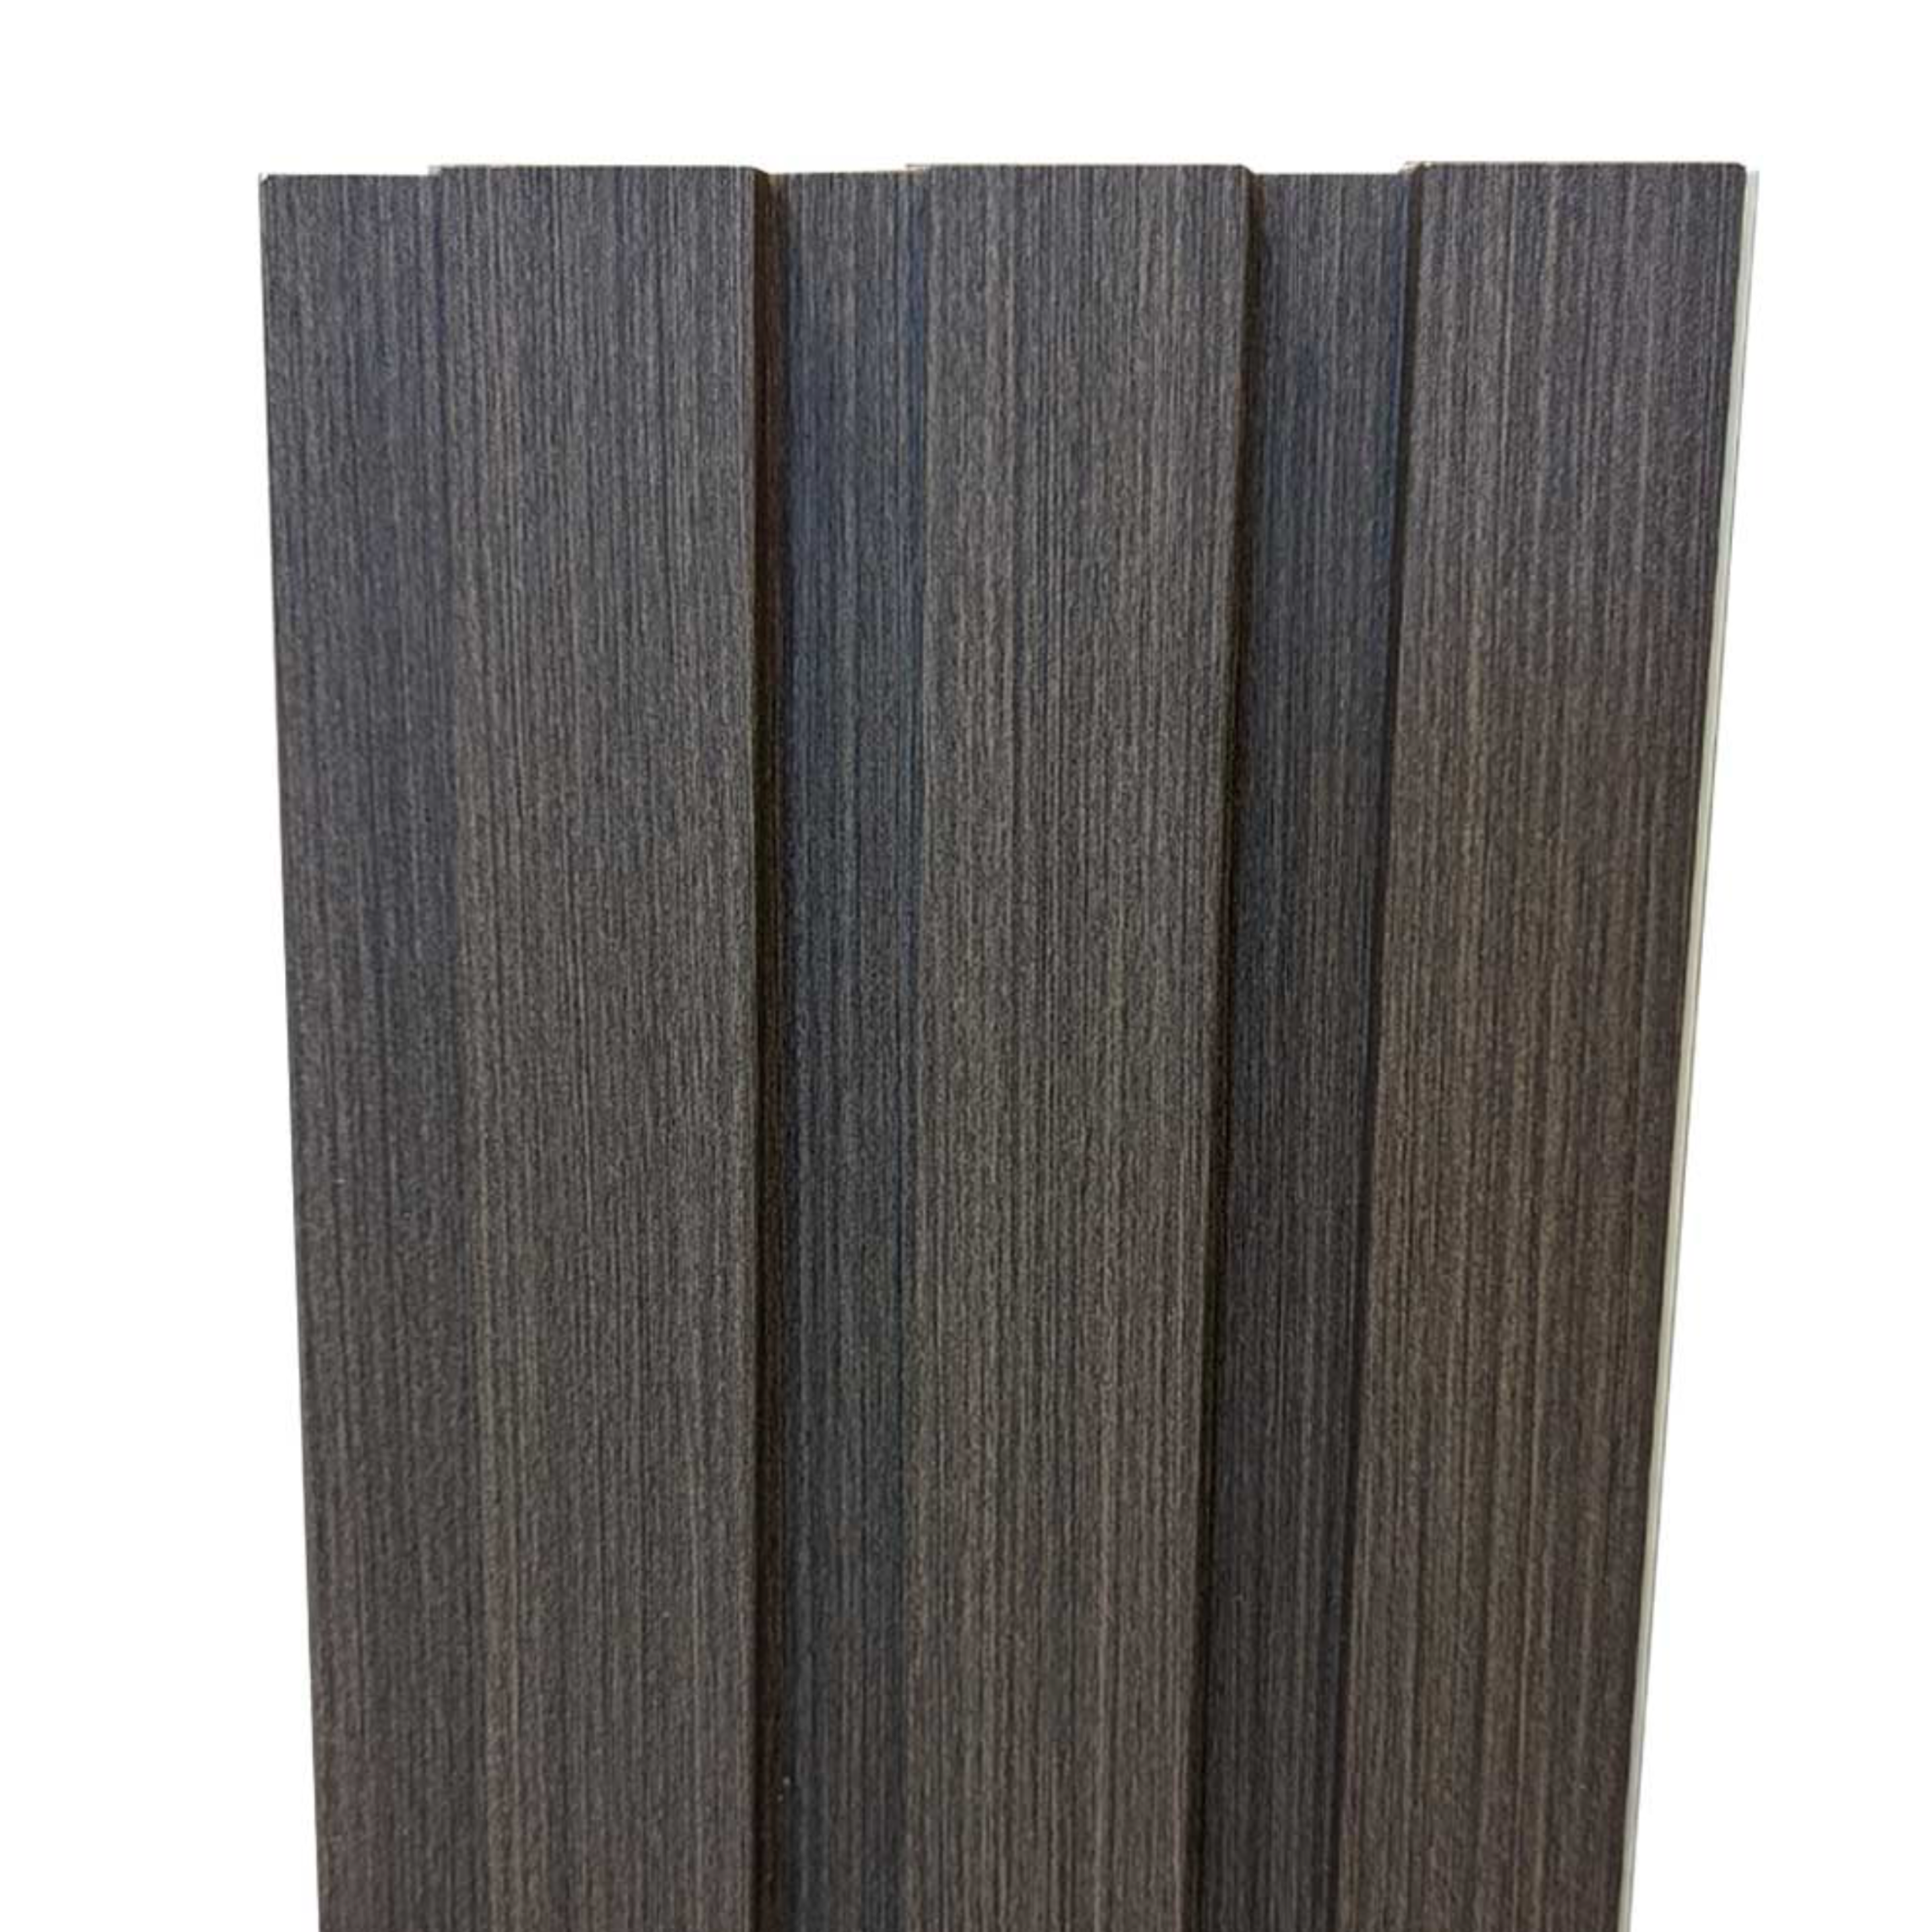 PVC Thermo-Slat Wall Panel - Hickery Brown